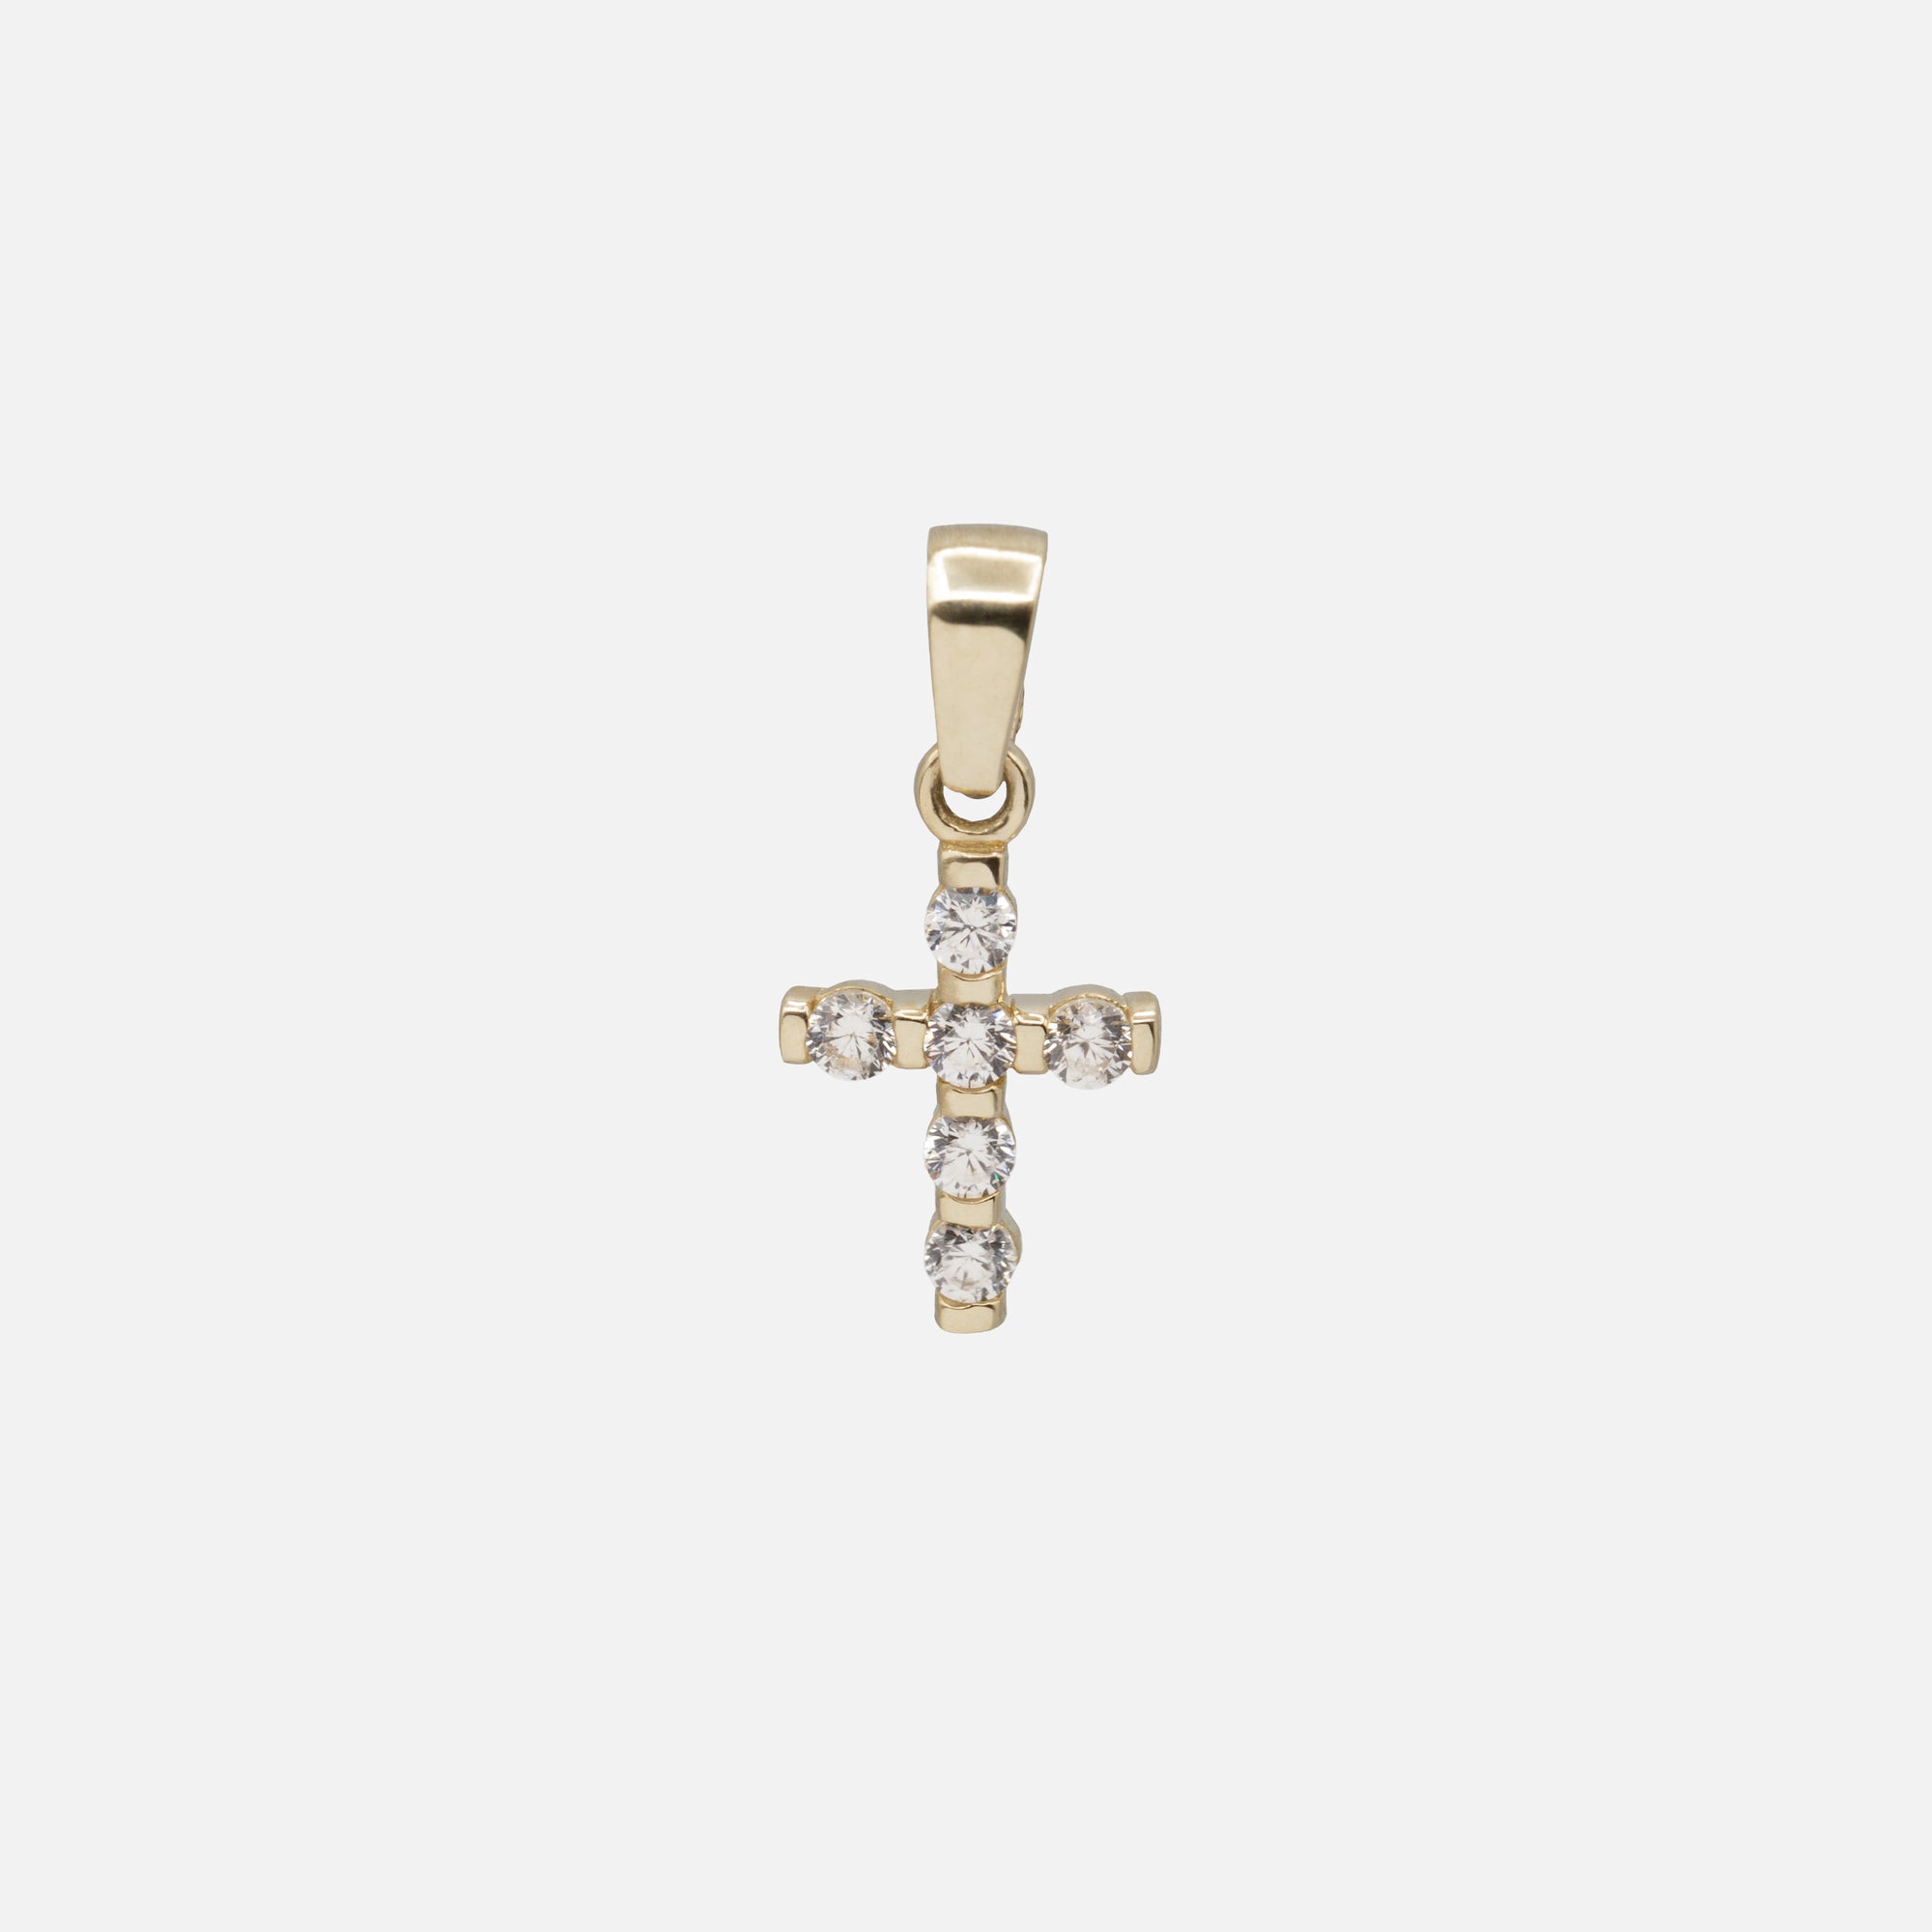 Cross charm and its six cubic zirconias in 10 carat gold